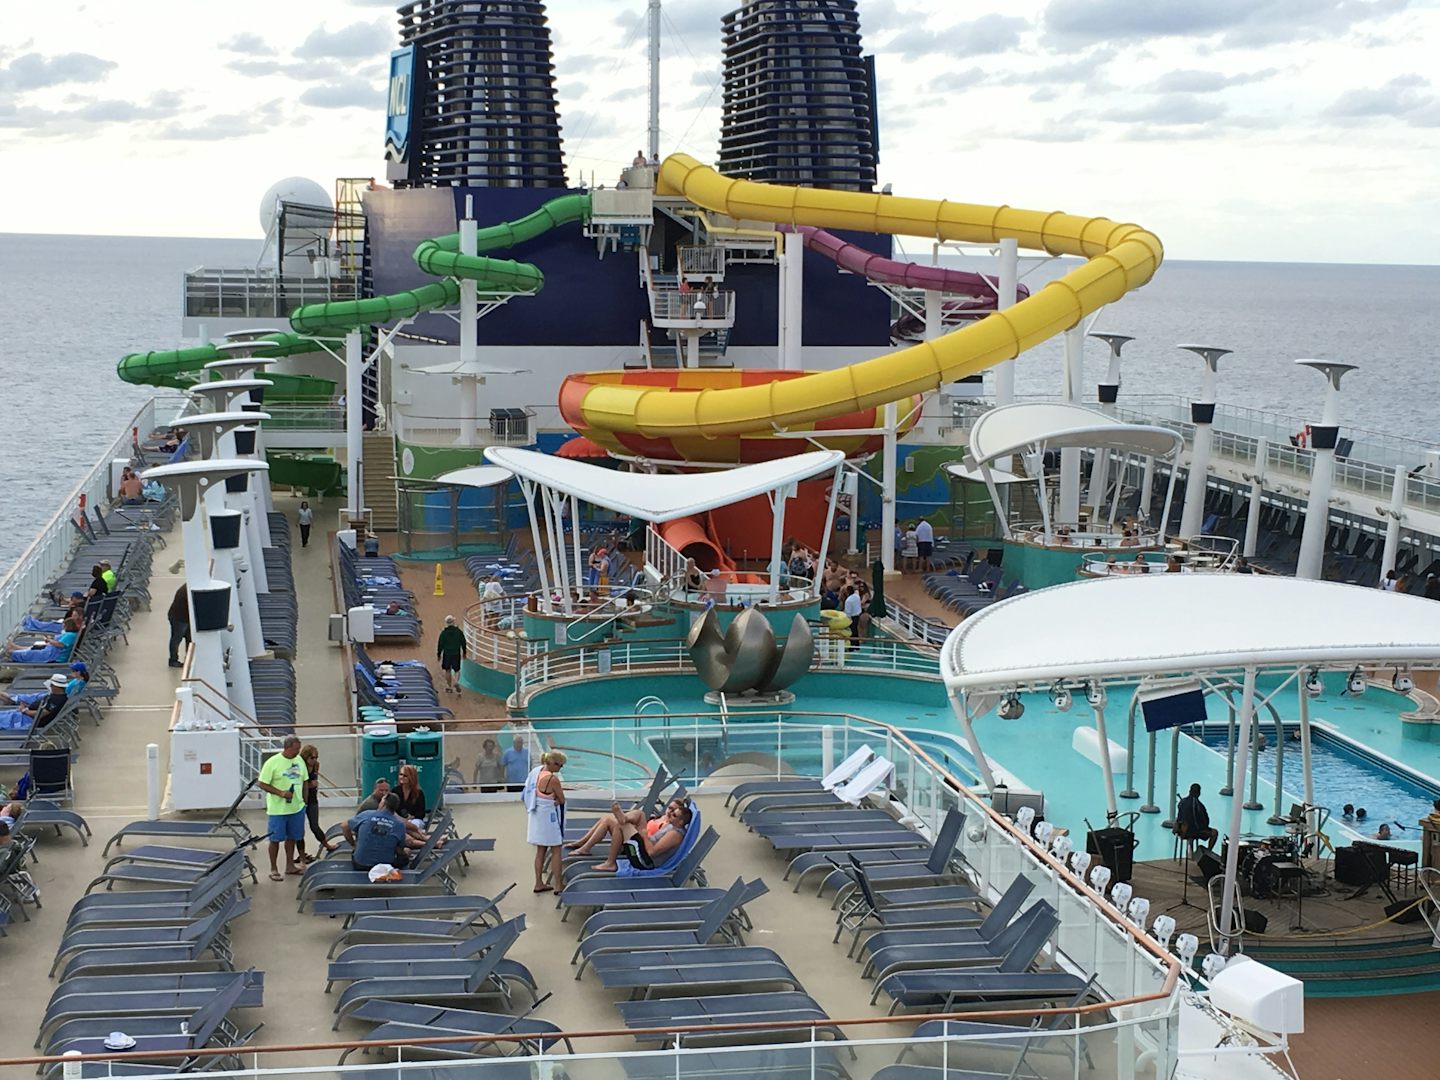 Pool deck of the Epic